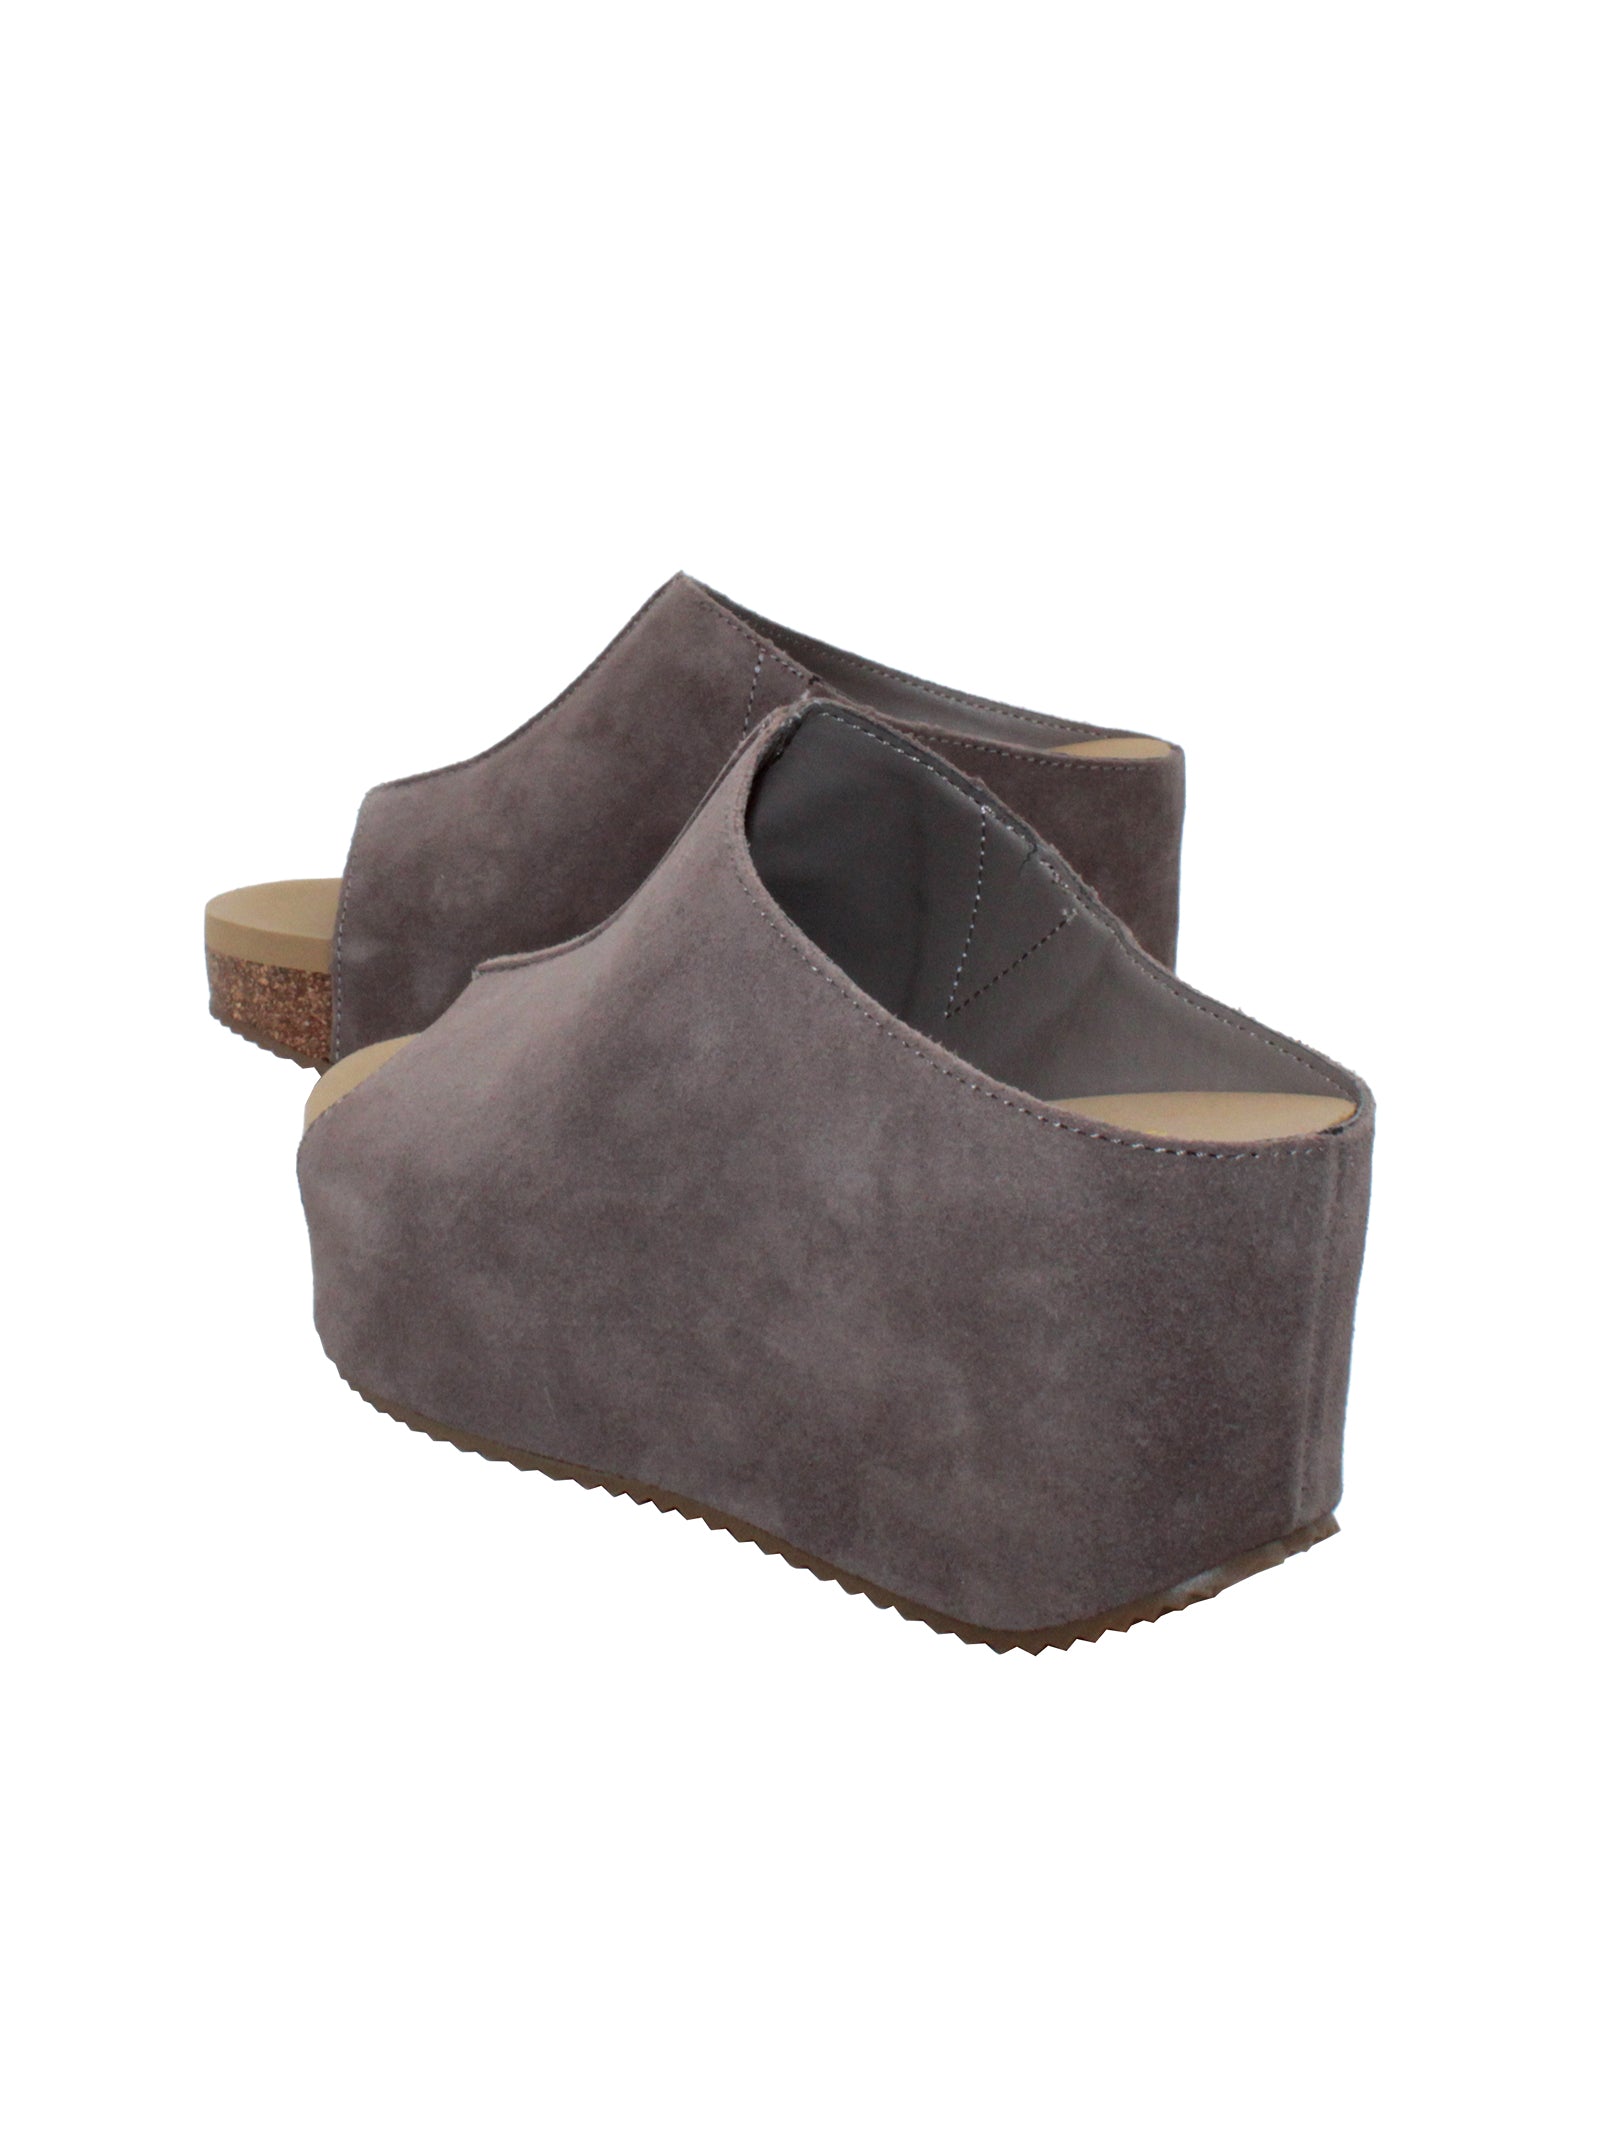 SLIP ON PEEP TOE WEDGE - Suede, hair calf, metallic tonal camo, faux snake upper with butted center seam and inner elastic gore for perfect fit - Slip on design - Leather lining - Signature ultra comfort EVA insole - Rubber traction outsole - Approx. 0.75" platform height - Approx. 2.75" wedge heel height taupe 4